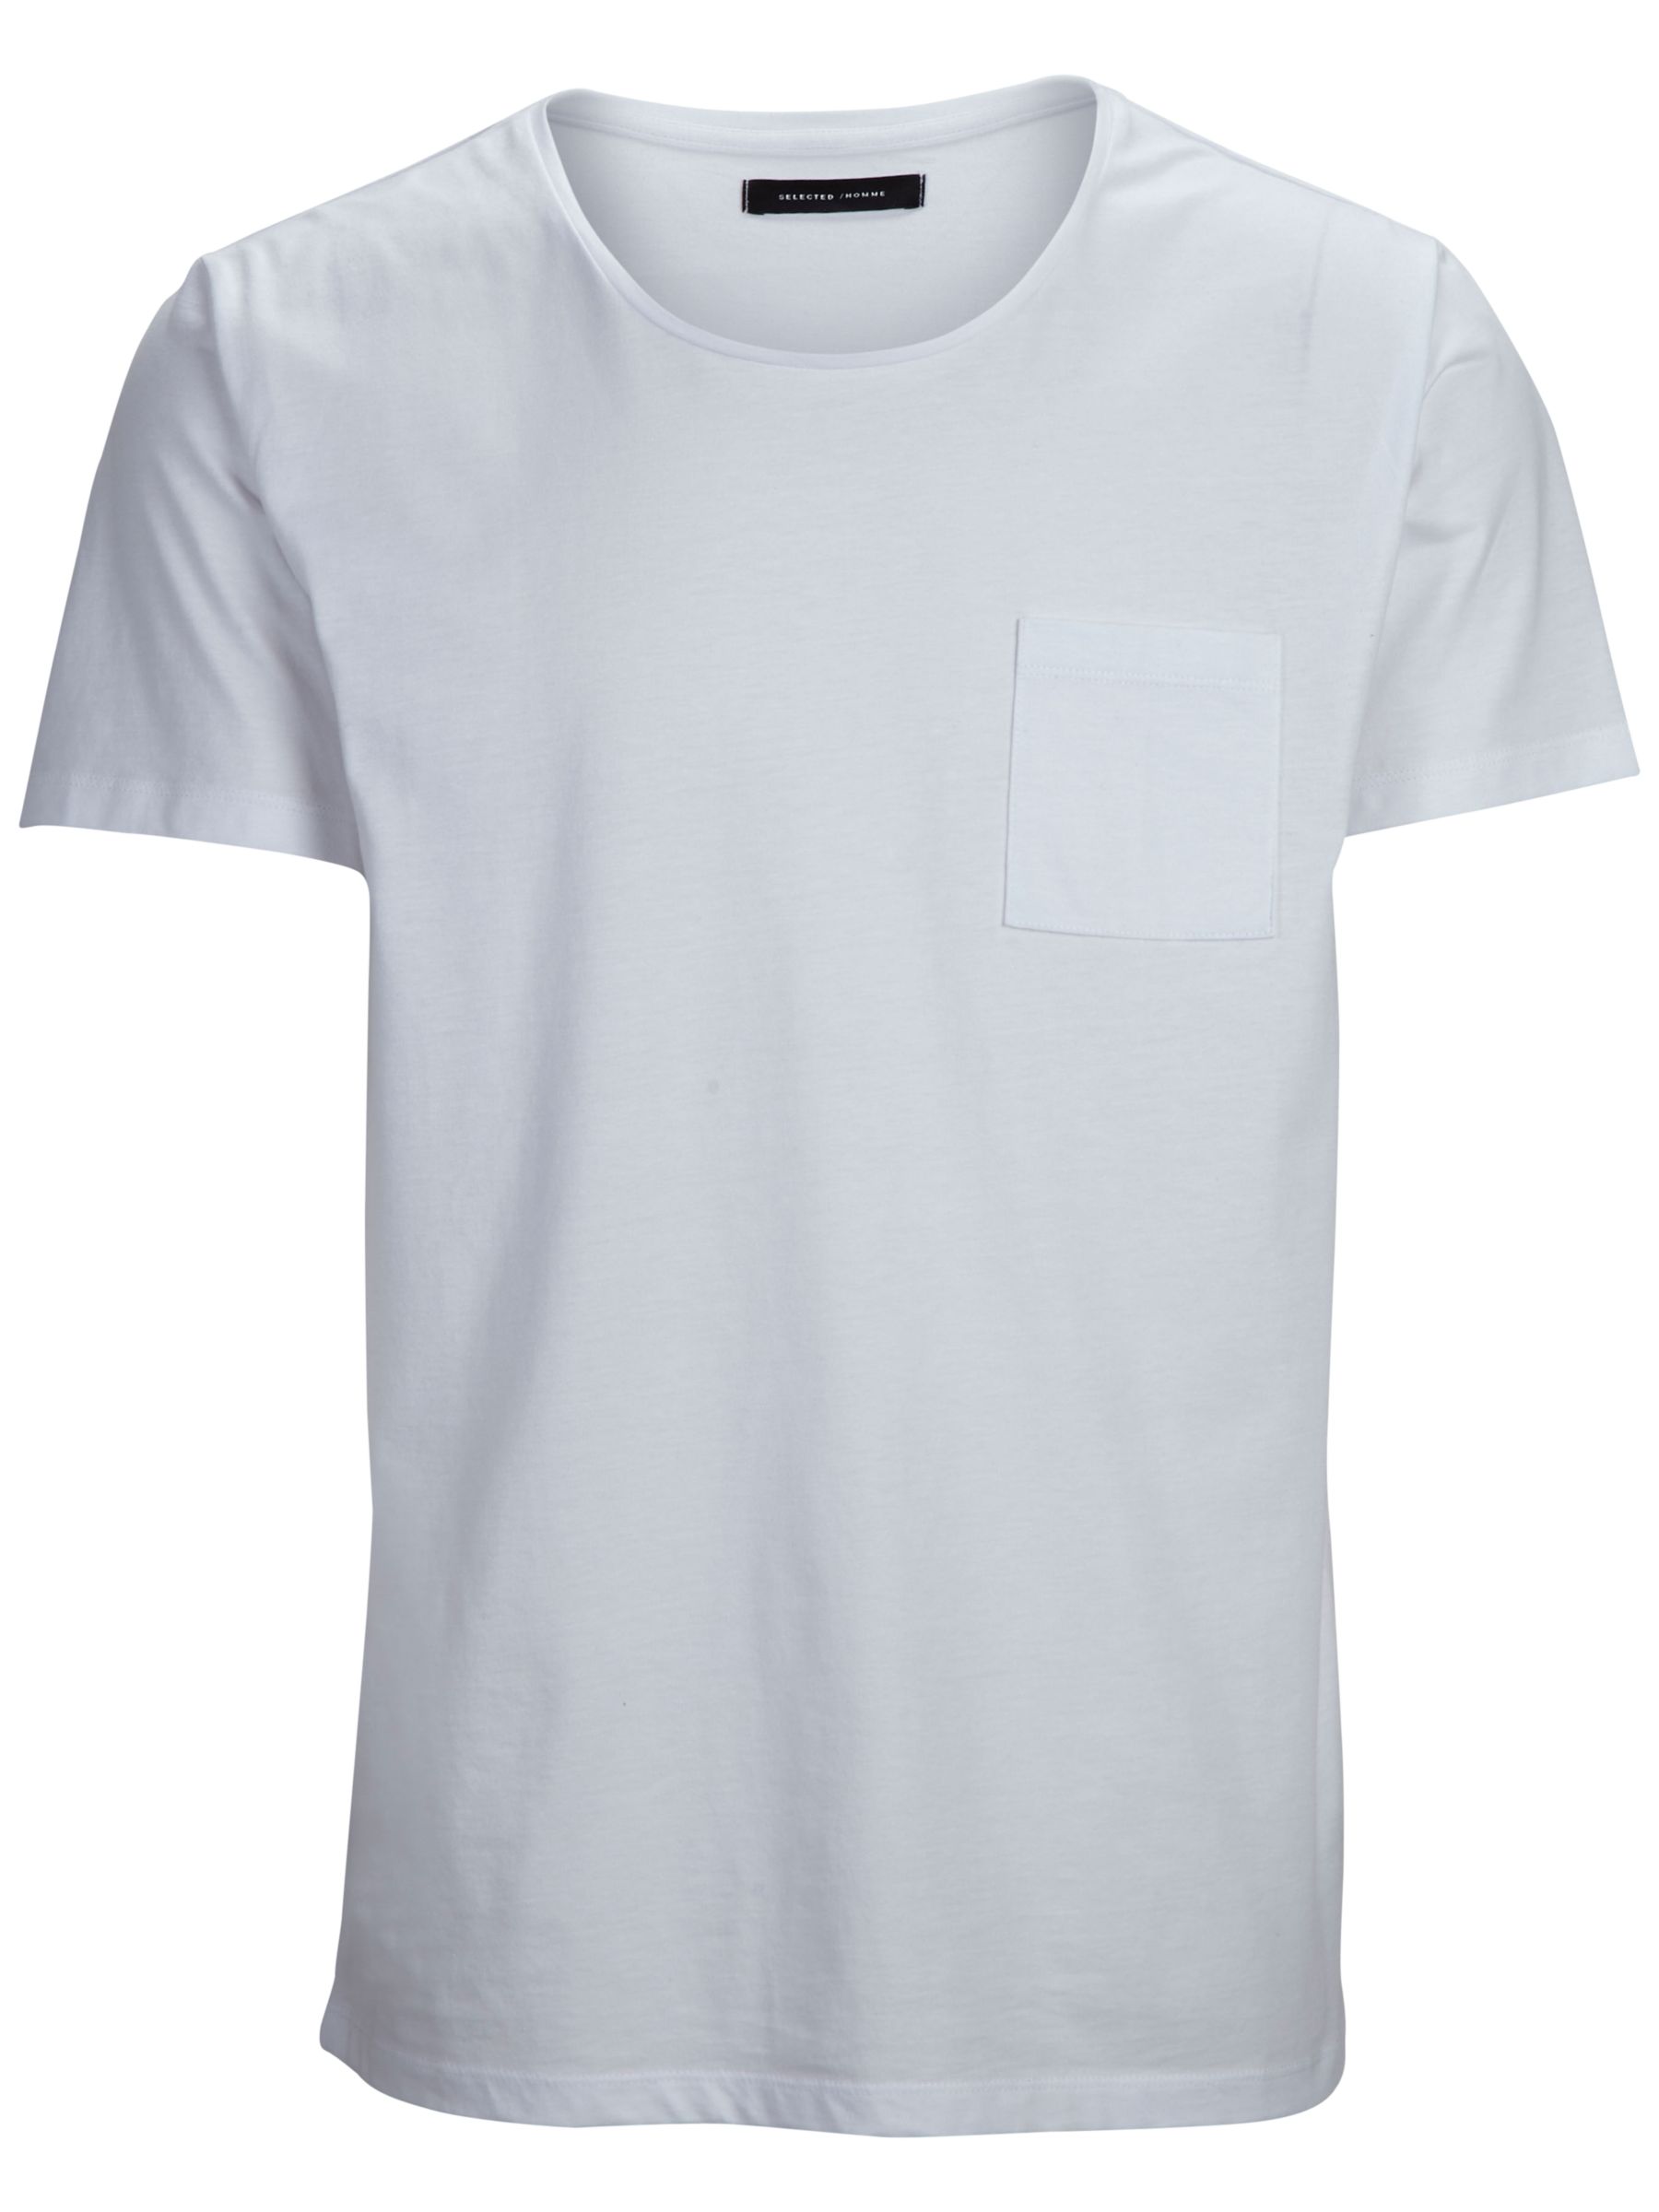 Selected Homme Dave Pima Cotton T-Shirt, Bright White, L